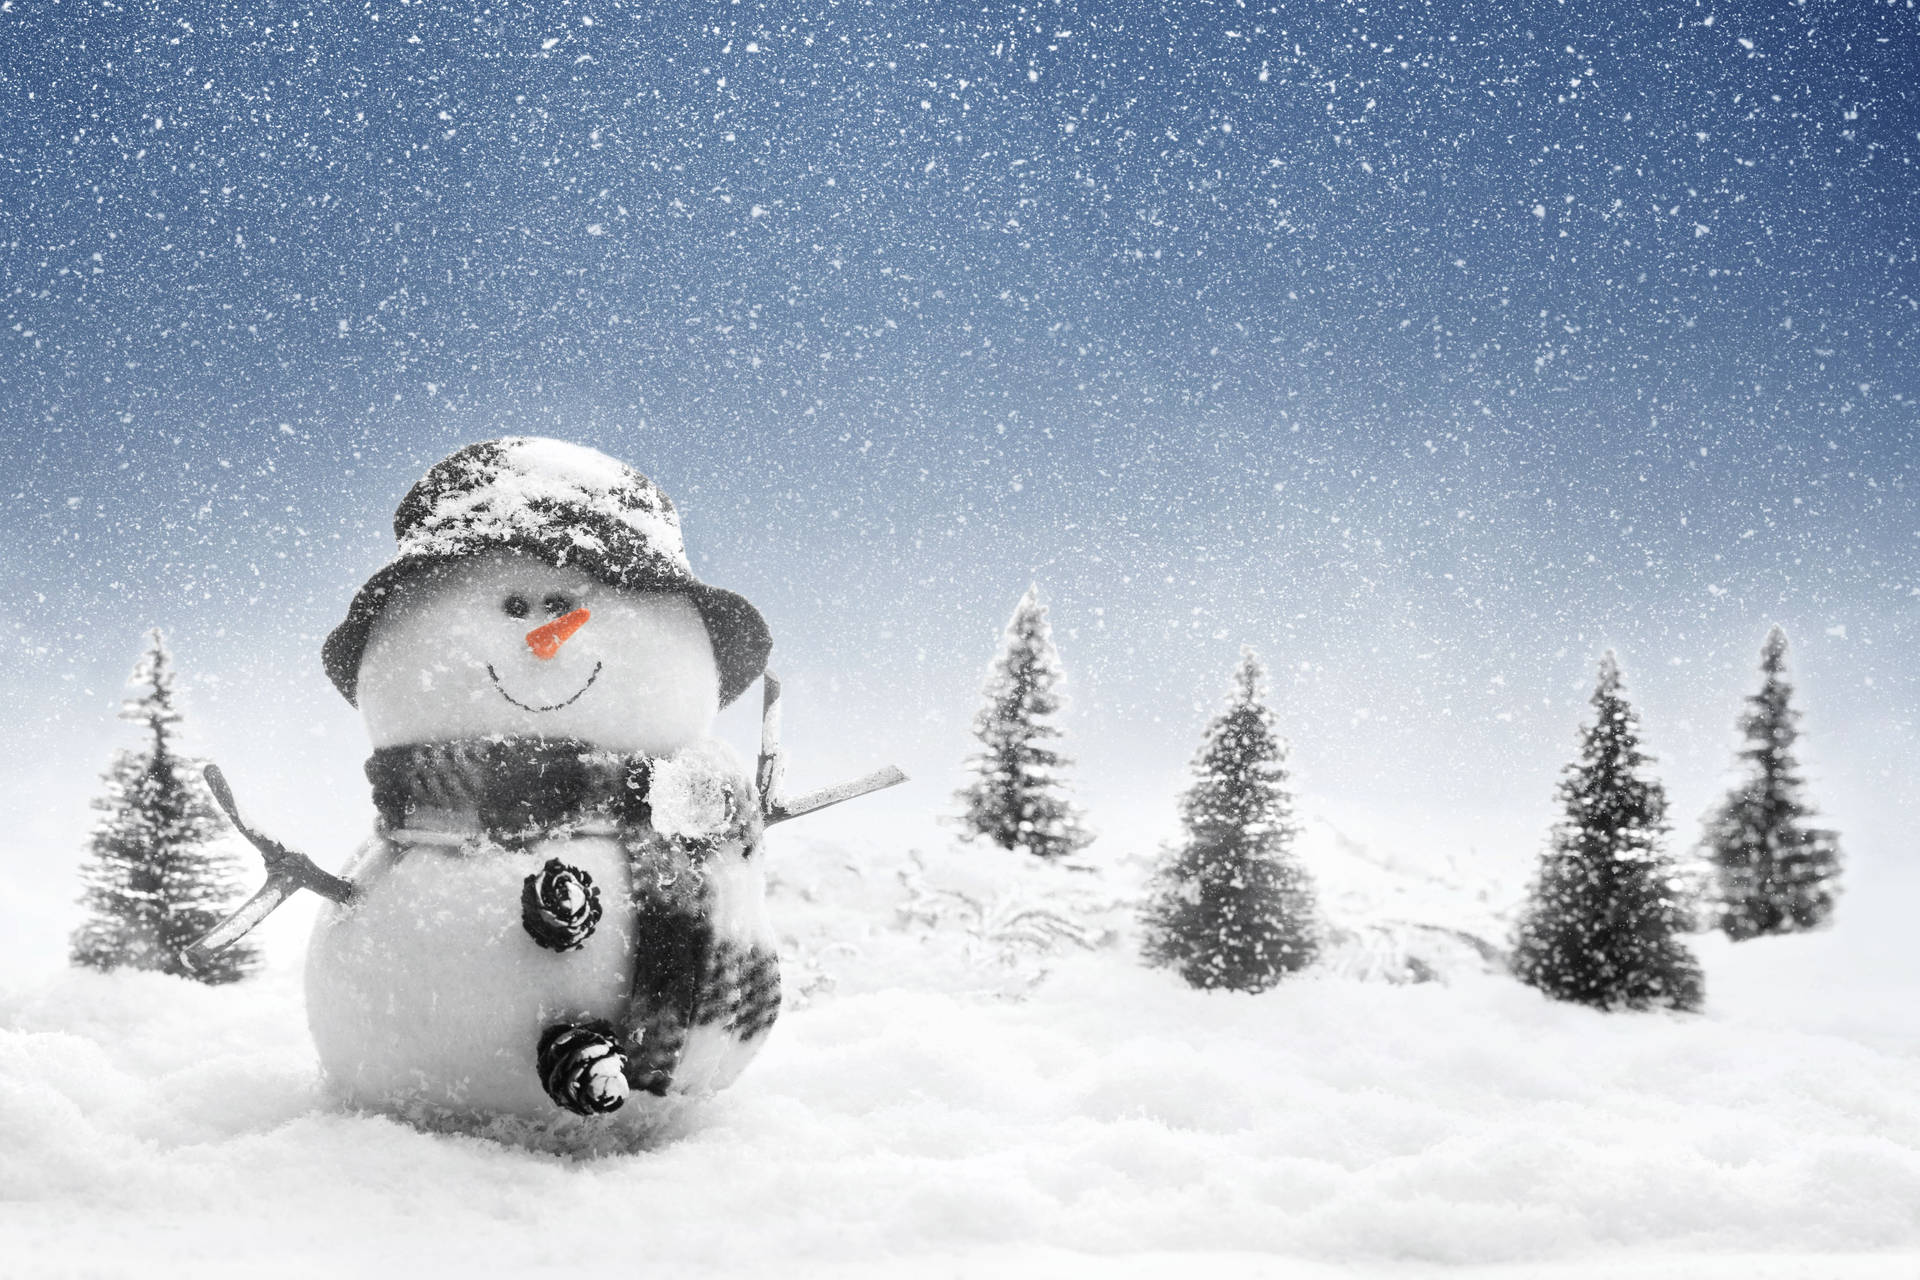 Snowman 5616X3744 Wallpaper and Background Image